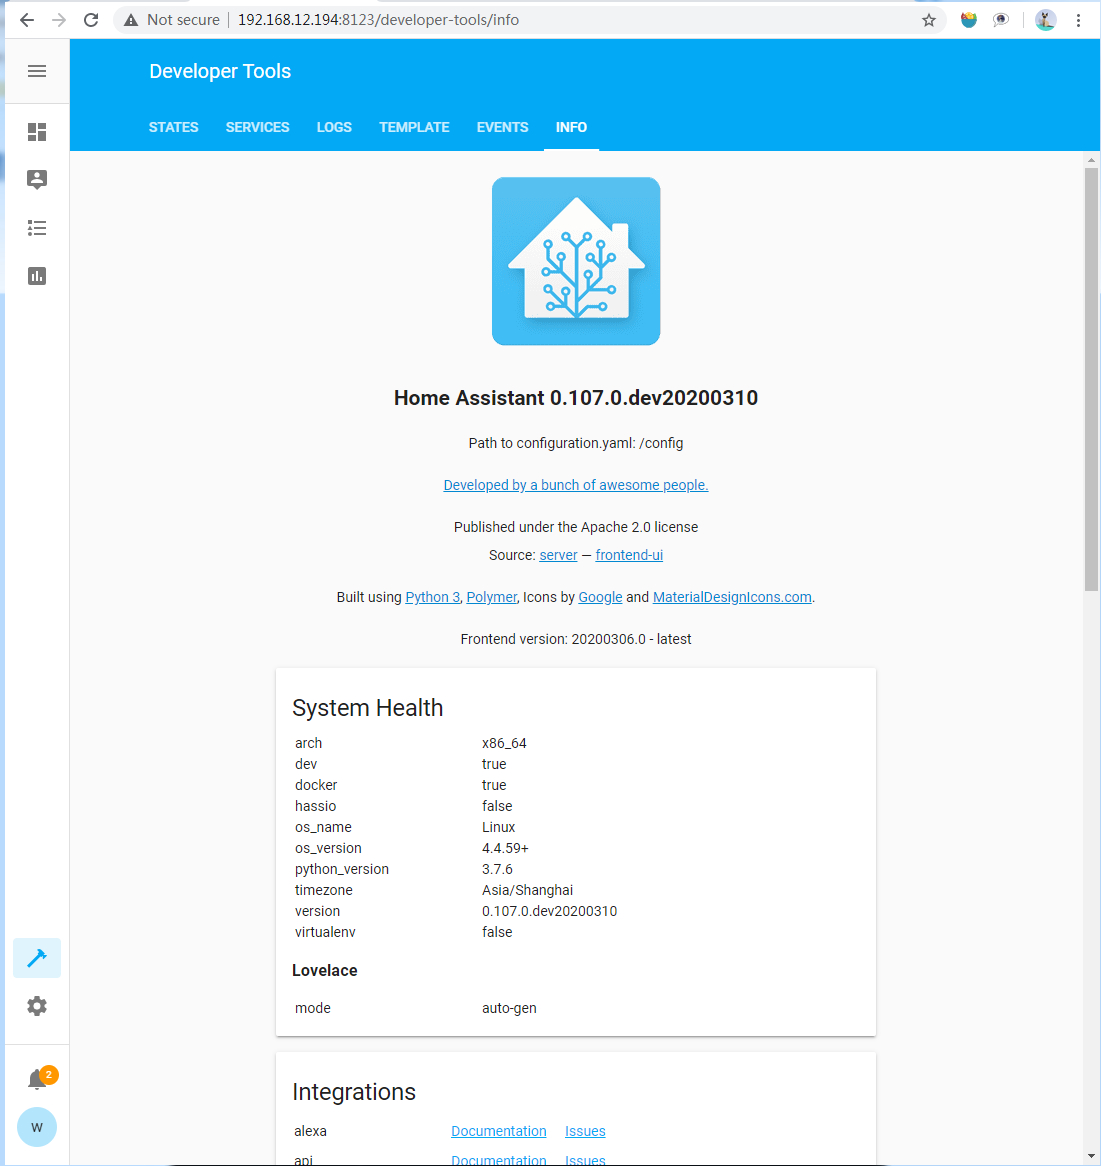 install the home assistant